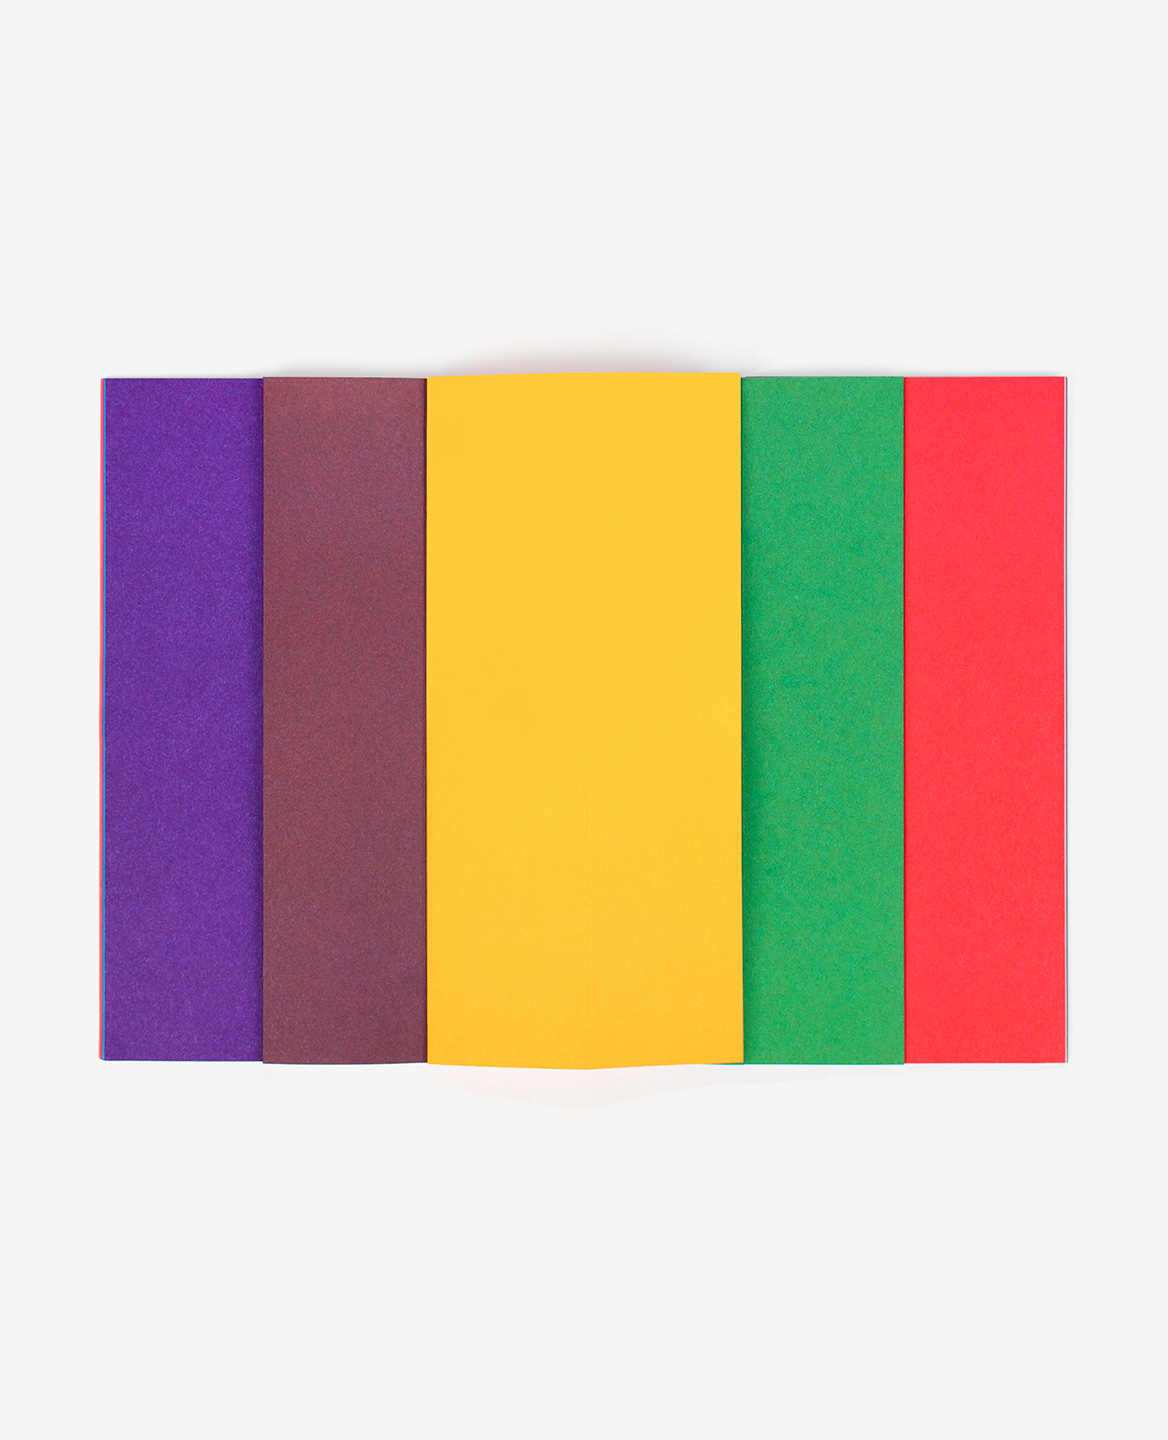 Violet, brown, yellow, green and red strips from the book Strips